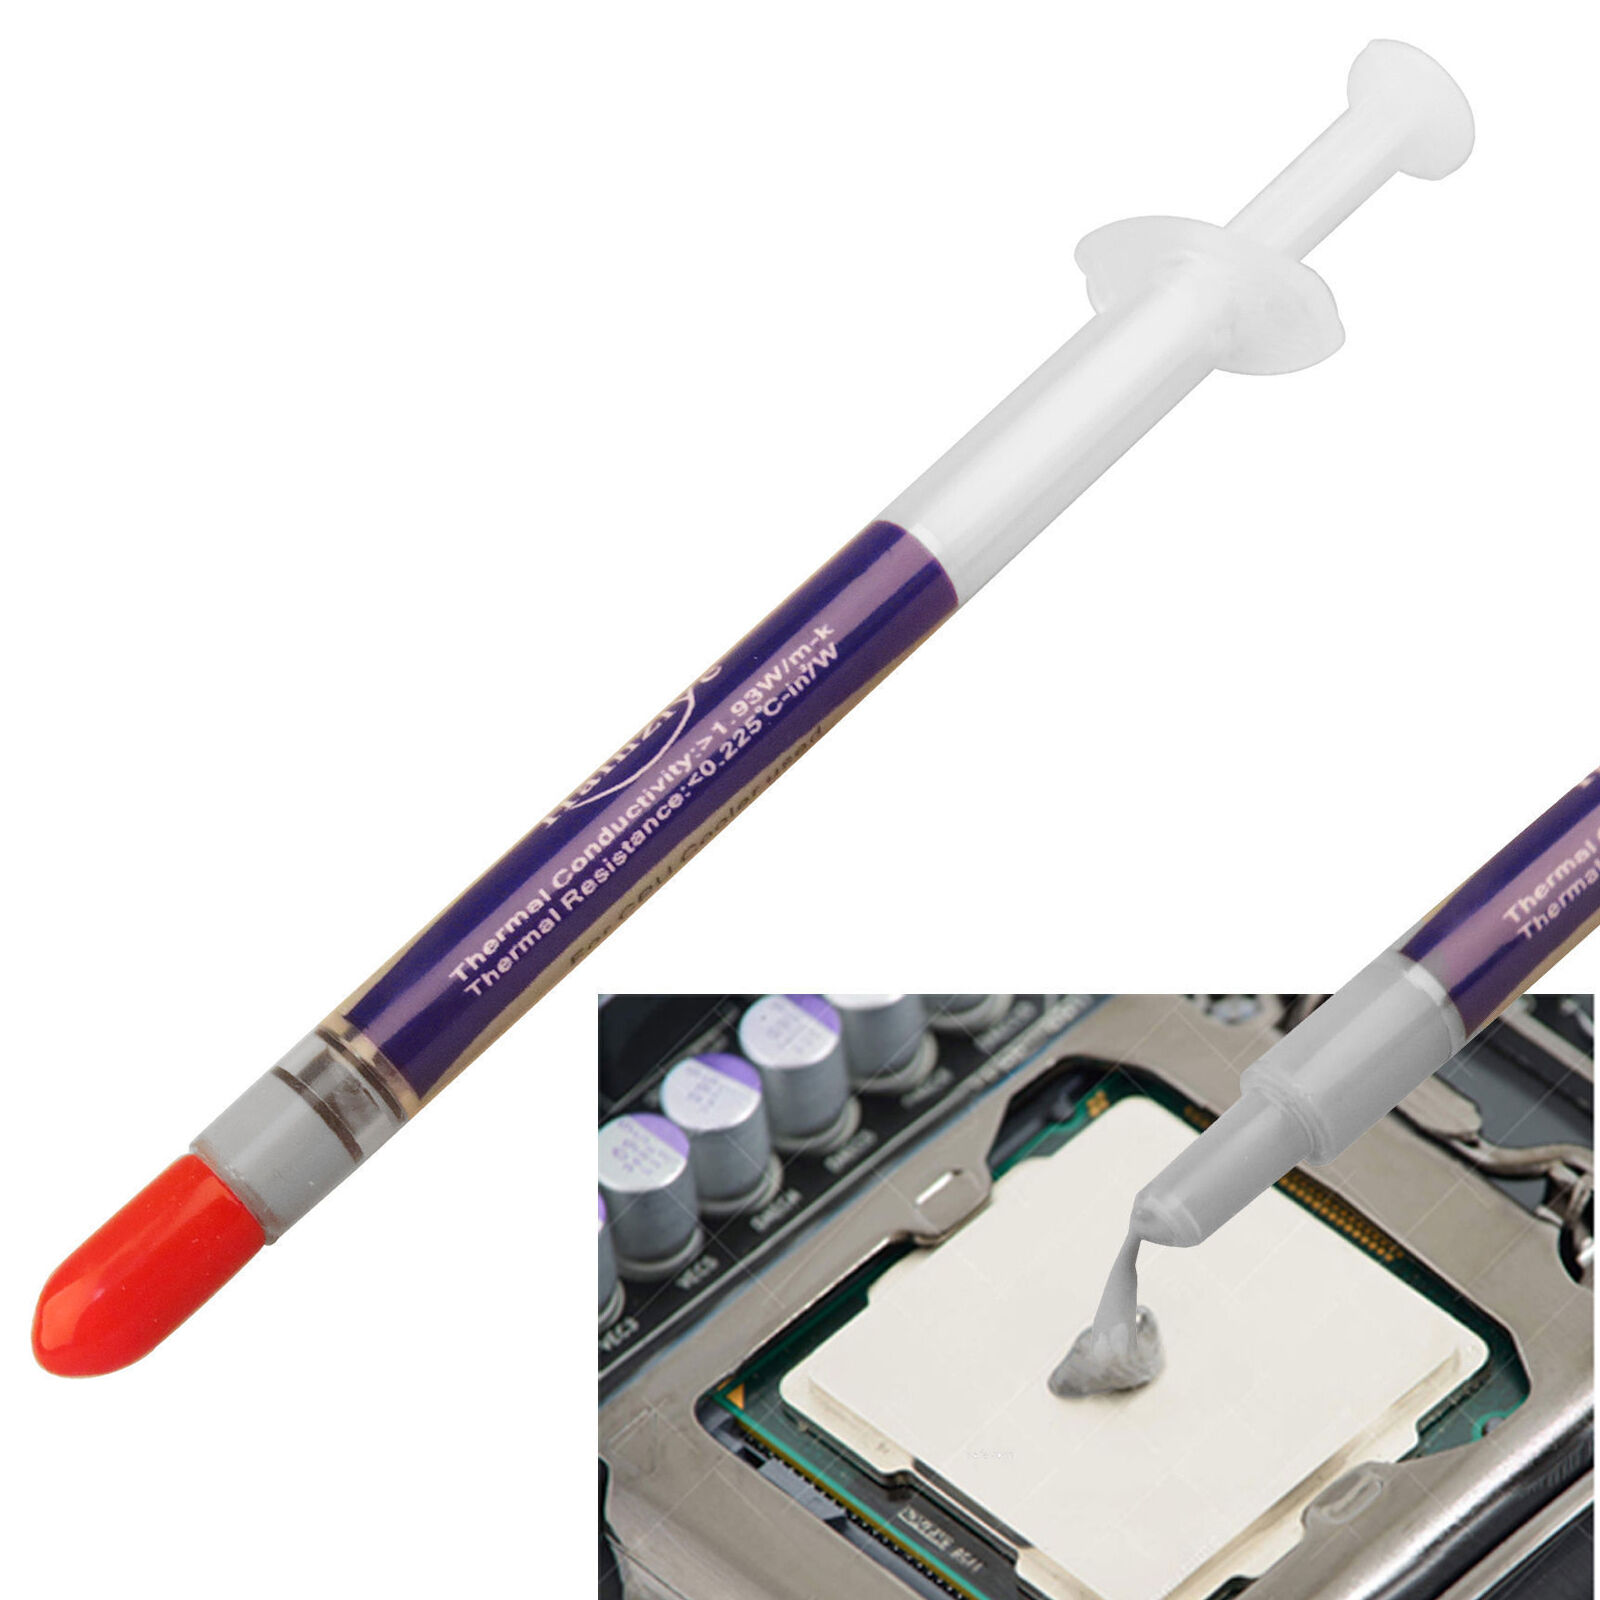 Silicon Thermal Heatsink Compound Cooling Paste Grease PC CPU Processor Syringe